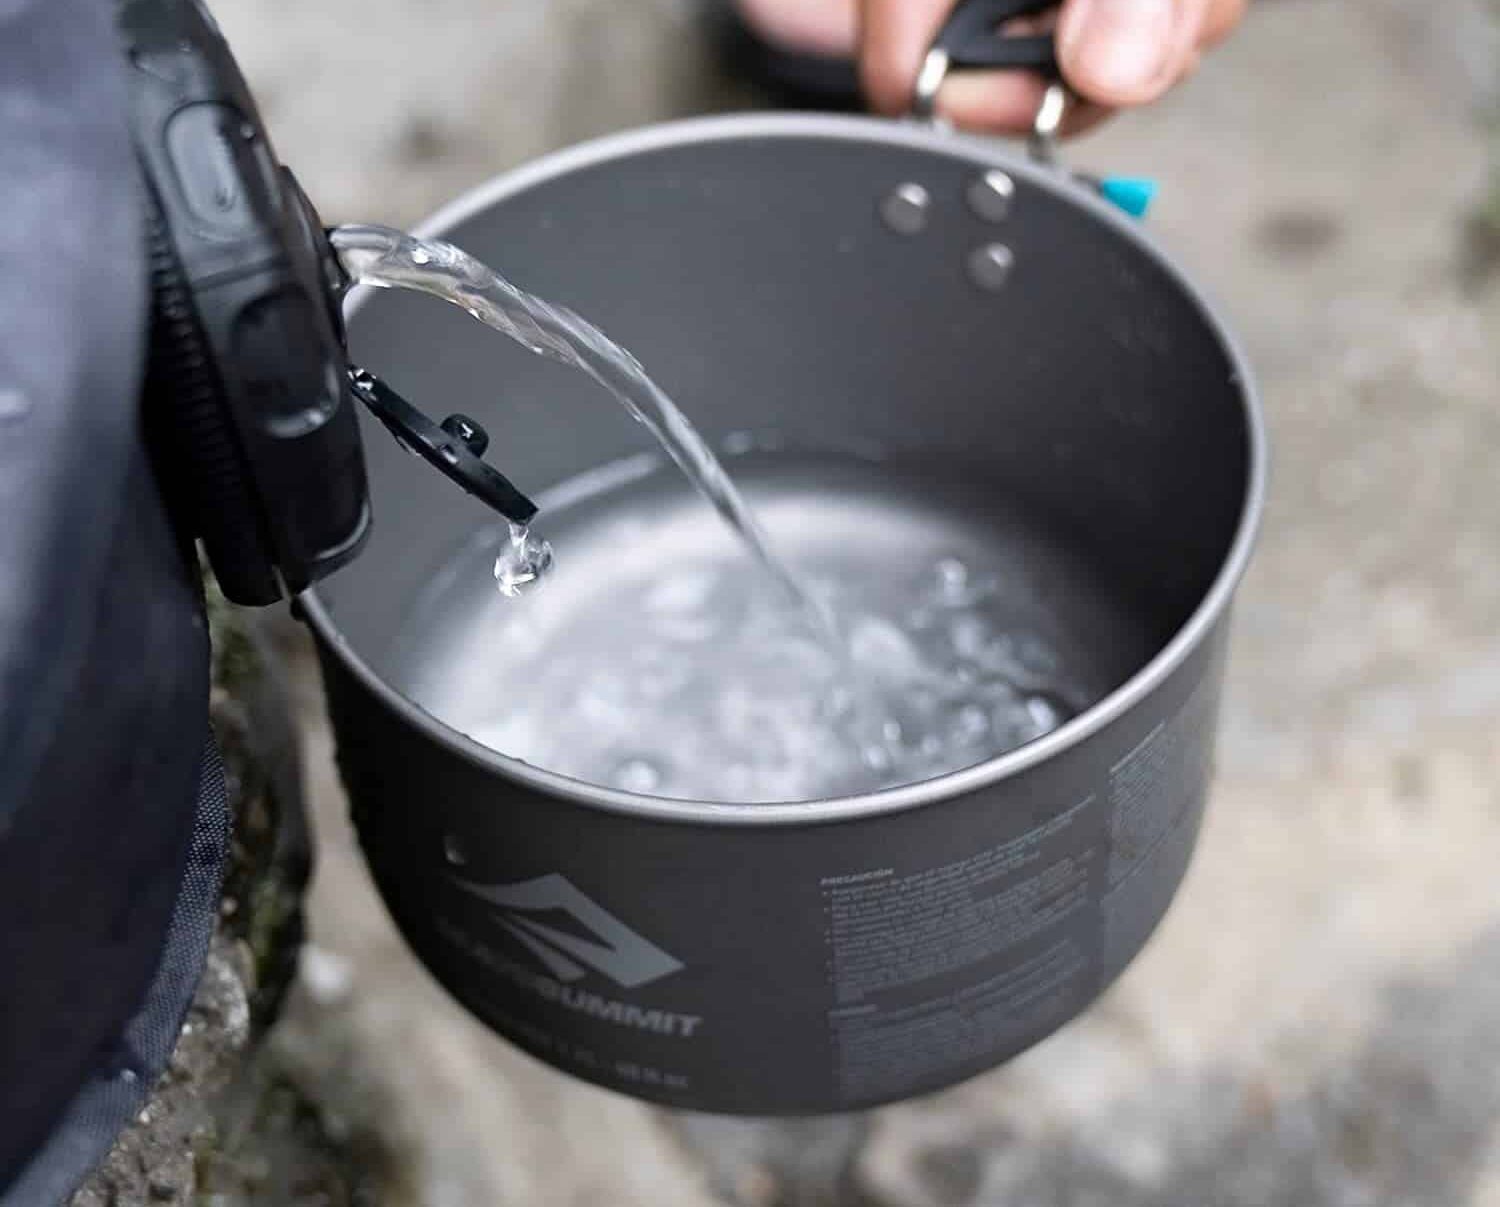 Sea to Summit Alpha Lightweight Aluminum Camping Cook Pot in use